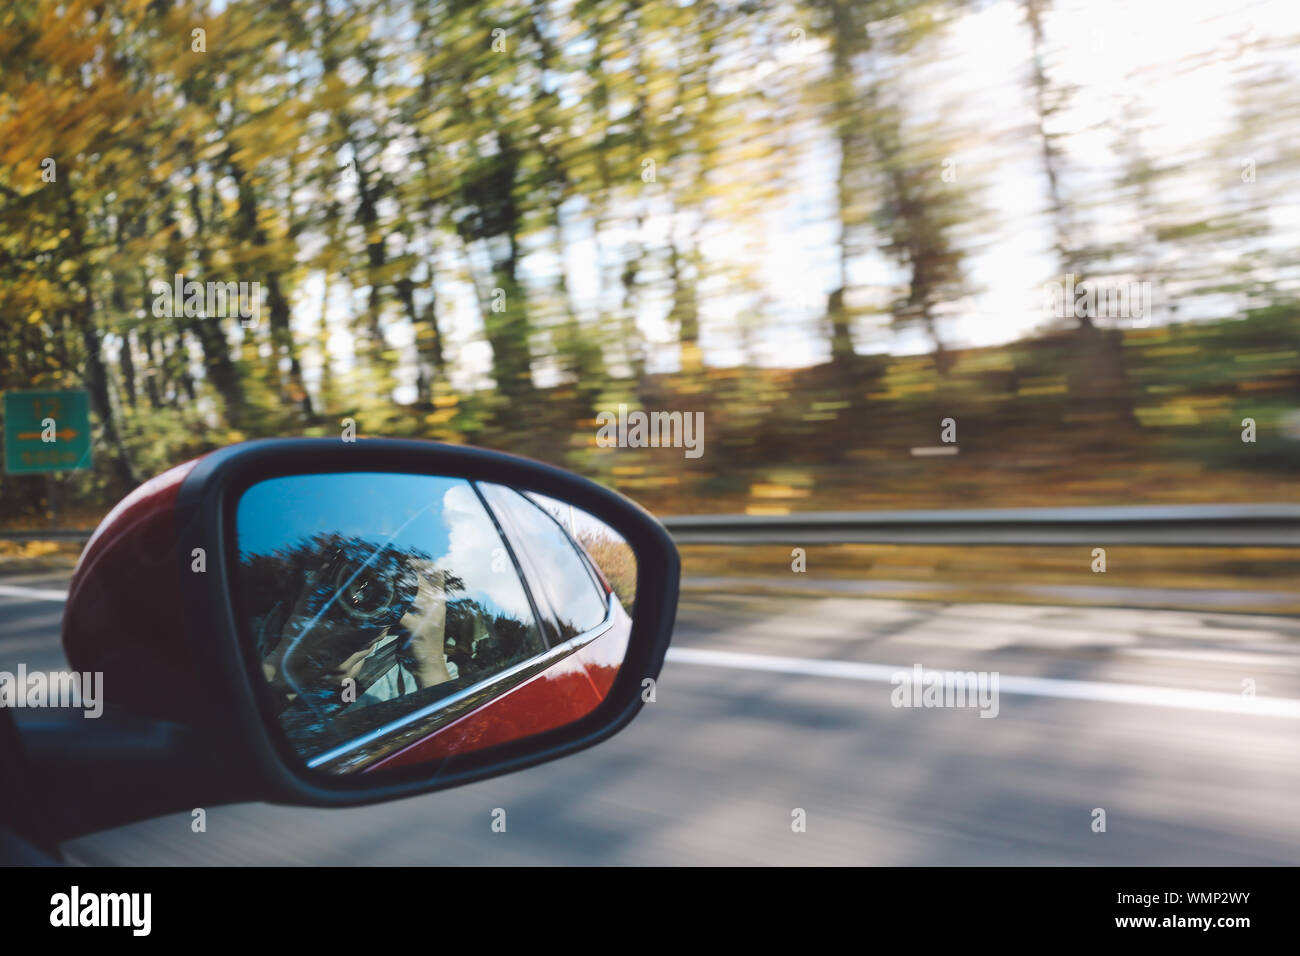 Person Photographing Self Reflection In Side-view Mirror Stock Photo